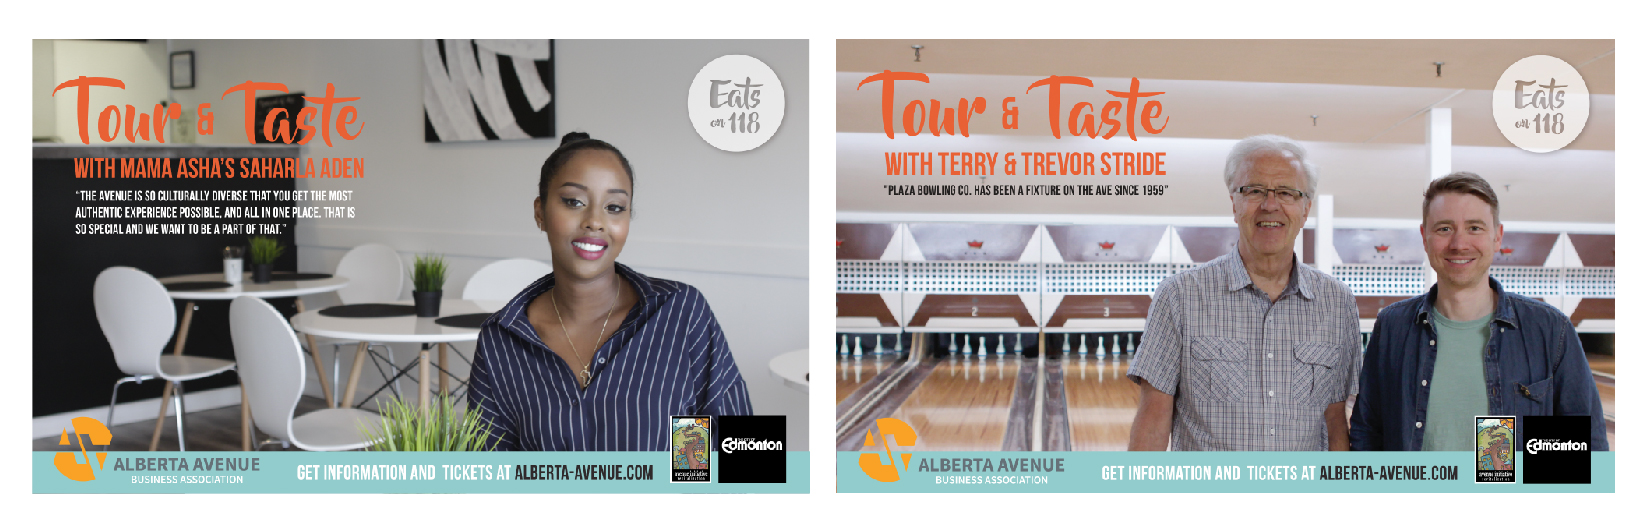  The Eats on 118 food tours will be going into it’s 4th year. Every tour to date has sold out and tour capacity has doubled due to demand. The feedback was been incredible and will be the most successful initiative in ABBA history. Other business ass